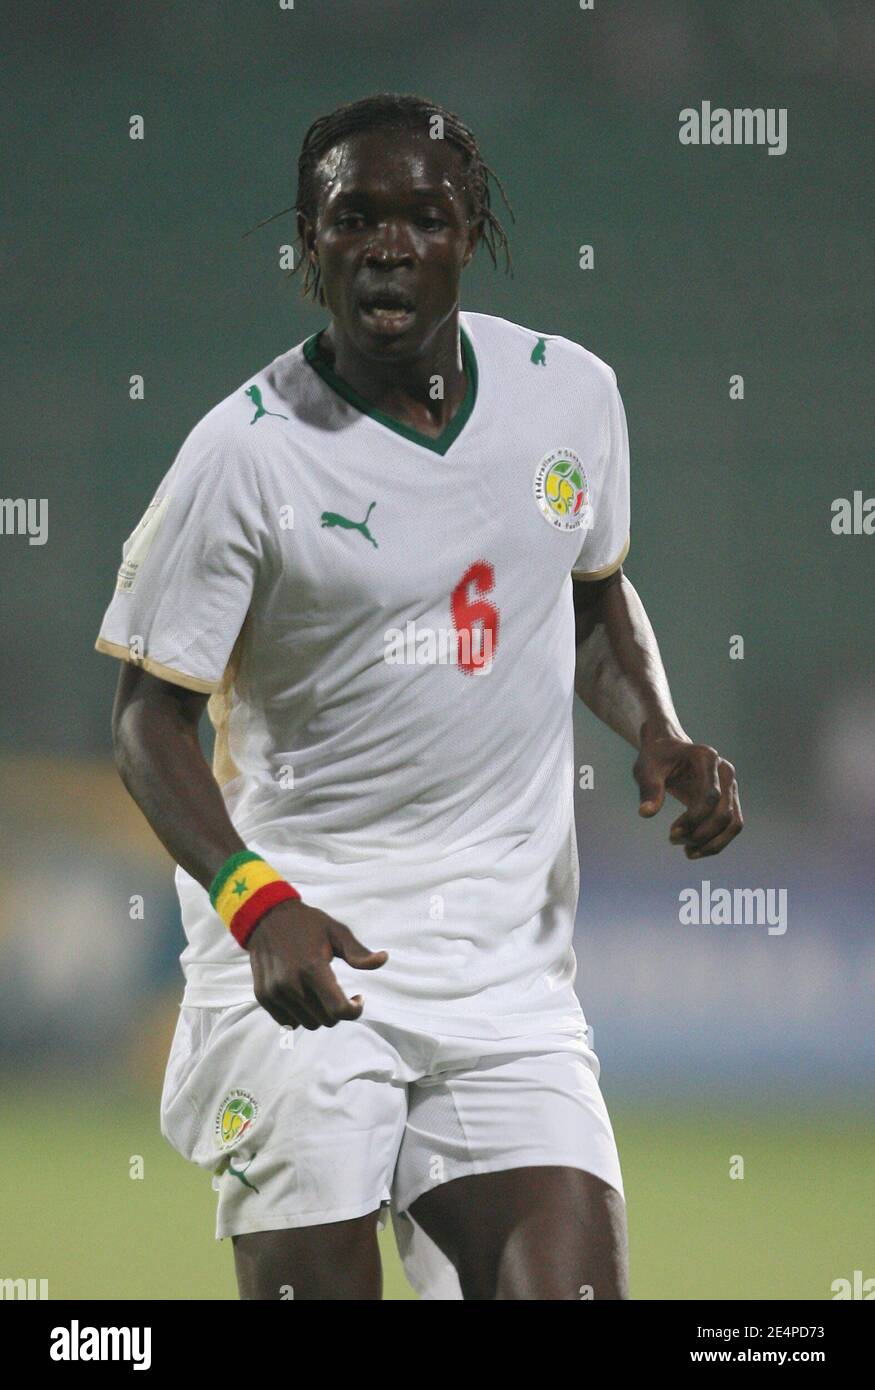 Senegal's Ibrahima Faye during the African Cup of Nations soccer match, Senegal vs South Africa in Kumasi, Ghana on January 31, 2008. The match ended in a 1-1 draw. Senegal failed to qualify for the next round of the competition. Photo by Steeve McMay/Cameleon/ABACAPRESS.COM Stock Photo